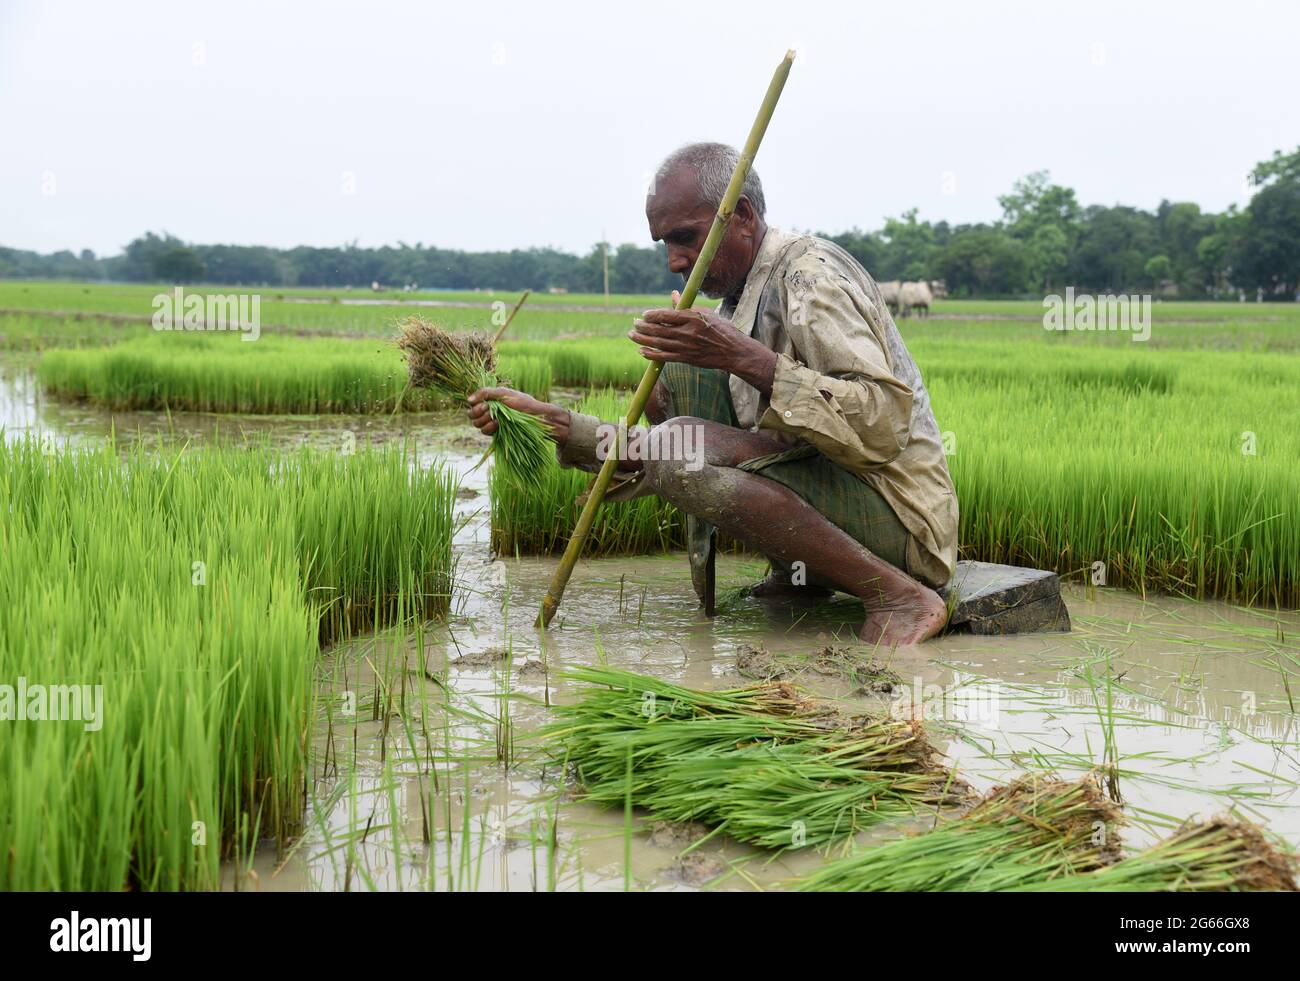 Guwahati, Guwahati, India. 3rd July, 2021. A farmer remove rice sapplings to plant in paddy field at Santipur village in Baksa district of Assam India on Saturday 3rd July 2021.The rice cultivation season begun in Assam state from June till August Credit: Dasarath Deka/ZUMA Wire/Alamy Live News Stock Photo